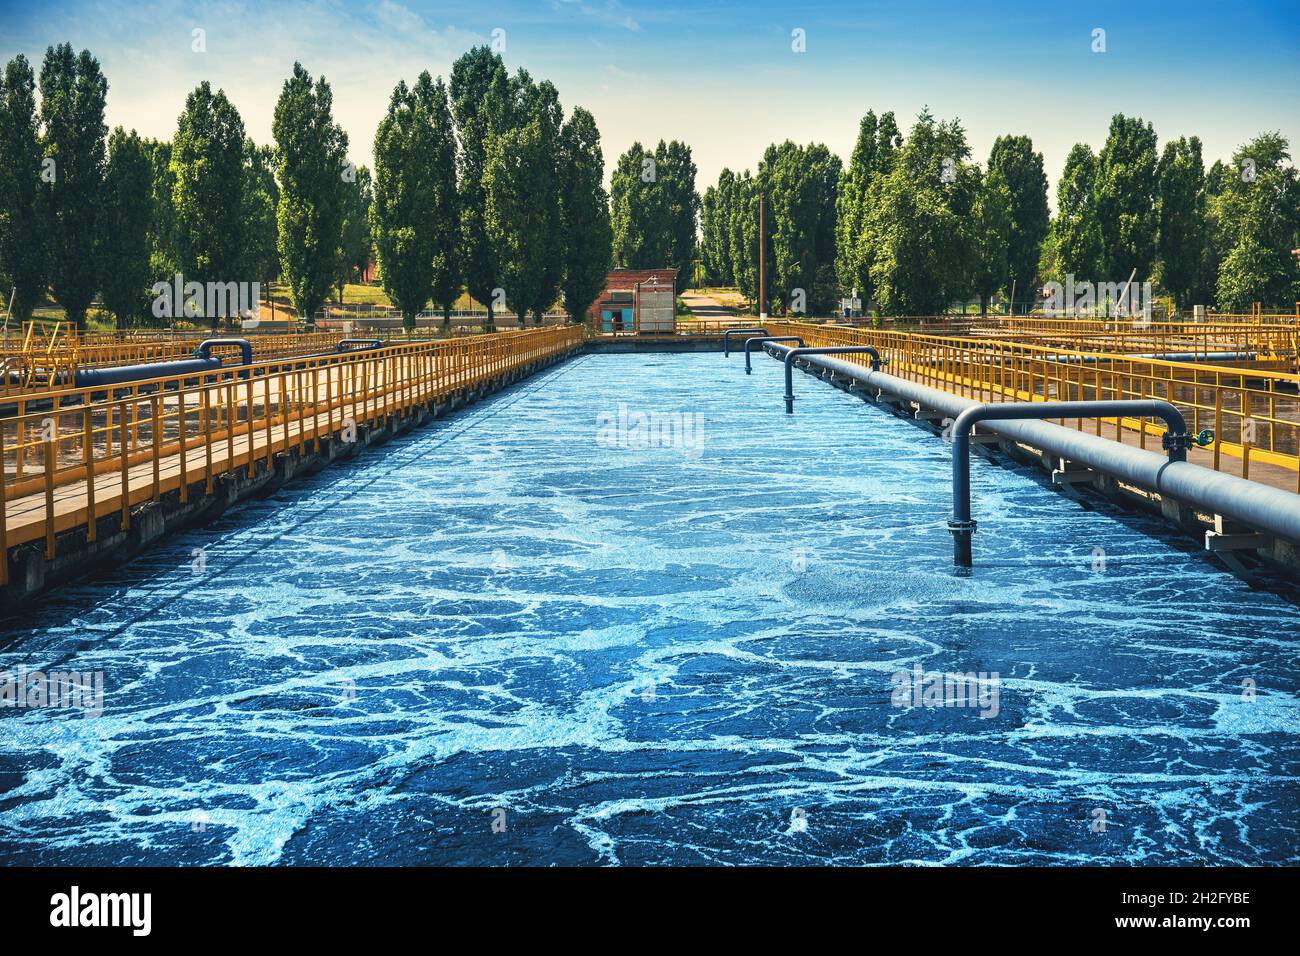 Modern industrial sewage treatment plant, reservoir for sedimentation and purification of waste water, toned Stock Photo